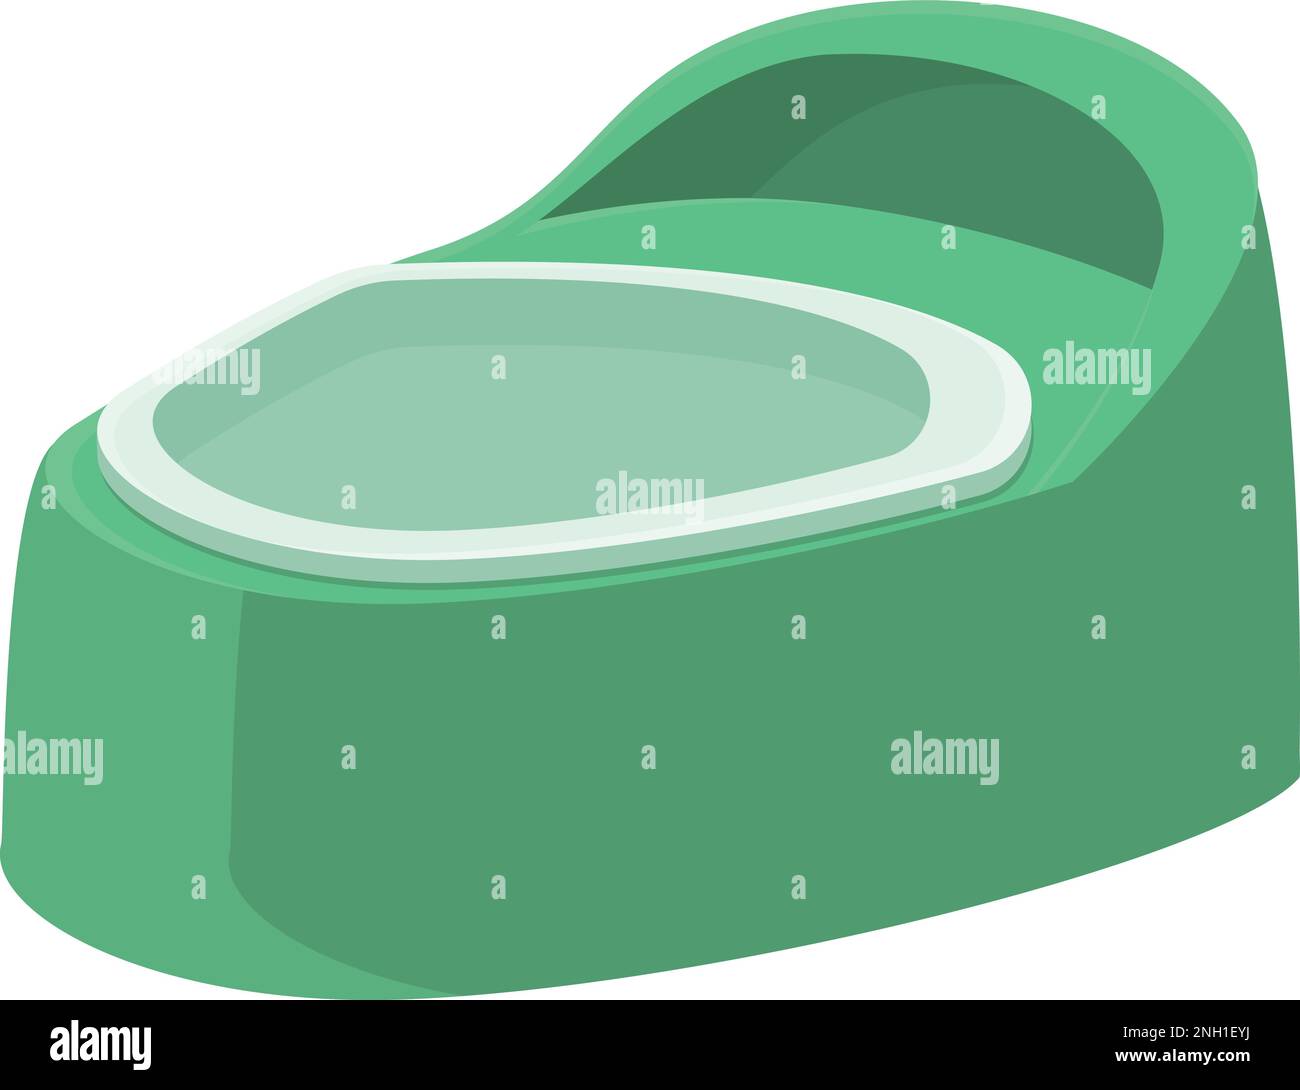 Toilet seat for child Stock Vector Images - Alamy